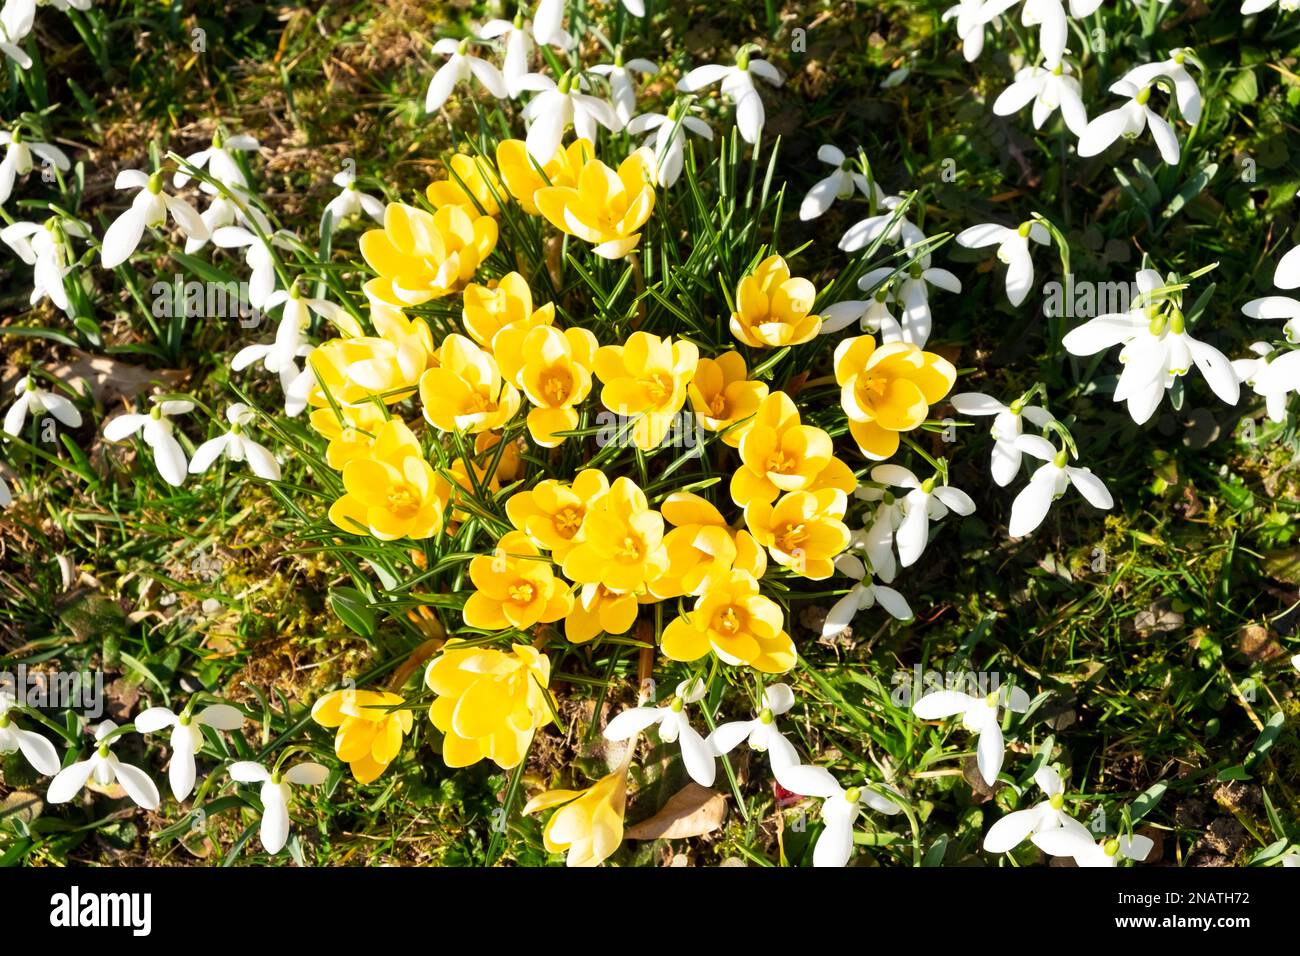 Top view looking down yellow crocus white snowdrops blooming growing  planted in lawn grass Carmarthenshire Wales UK Great Britain  KATHY DEWITT Stock Photo